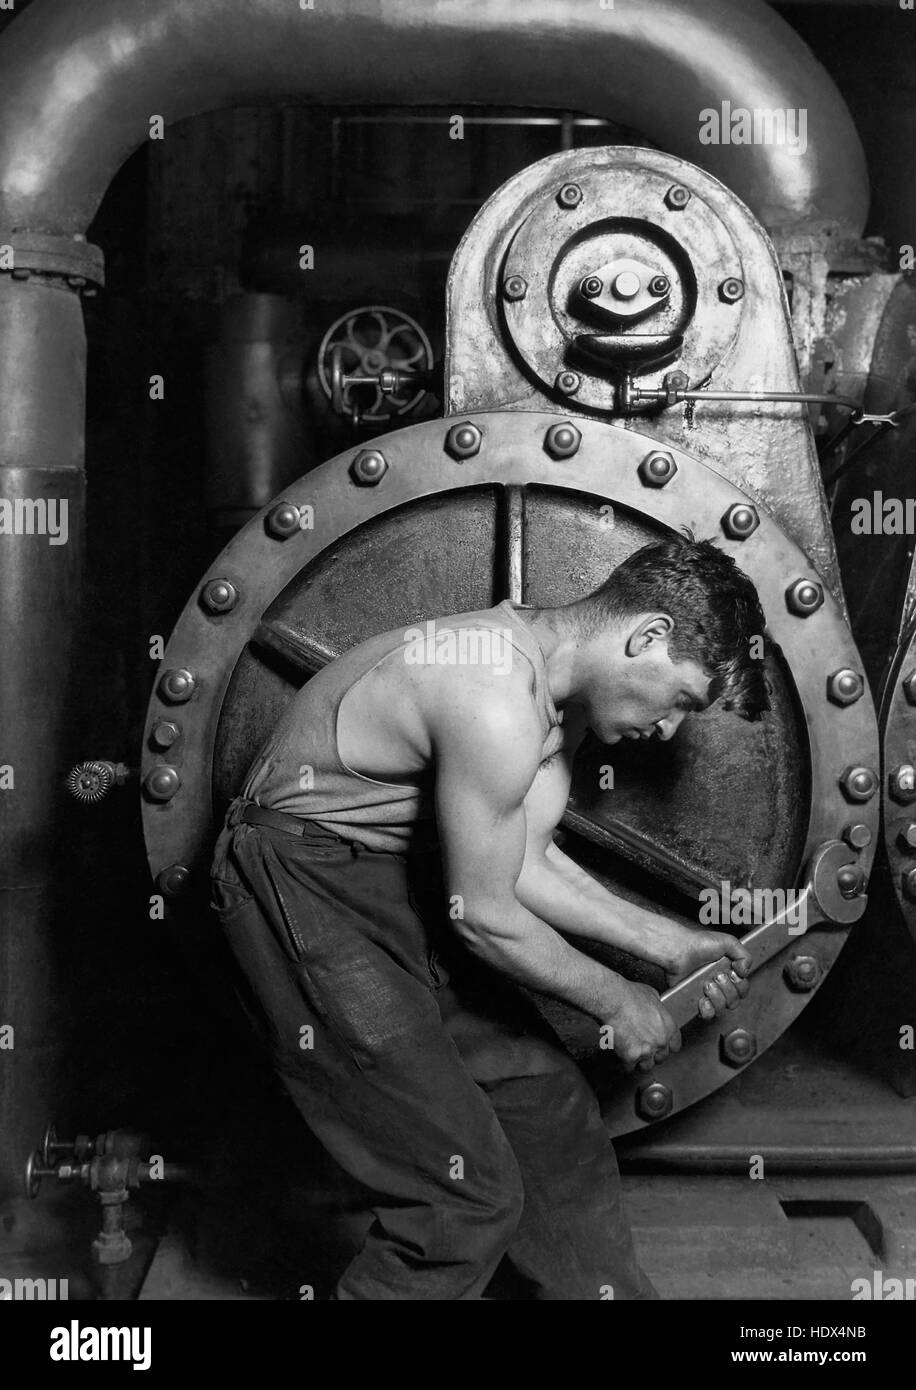 Lewis Hine's 1920 Power house mechanic working on steam pump, one of his 'work portraits', shows a working class American in an industrial setting. The carefully posed subject, a young man with wrench in hand, is hunched over, surrounded by the machinery that defines his job. But while constrained by the machinery (almost a metal womb), the man is straining against it--muscles taut, with a determined look--in an iconic representation of masculinity. Photograph By Lewis W. Hine. Stock Photo